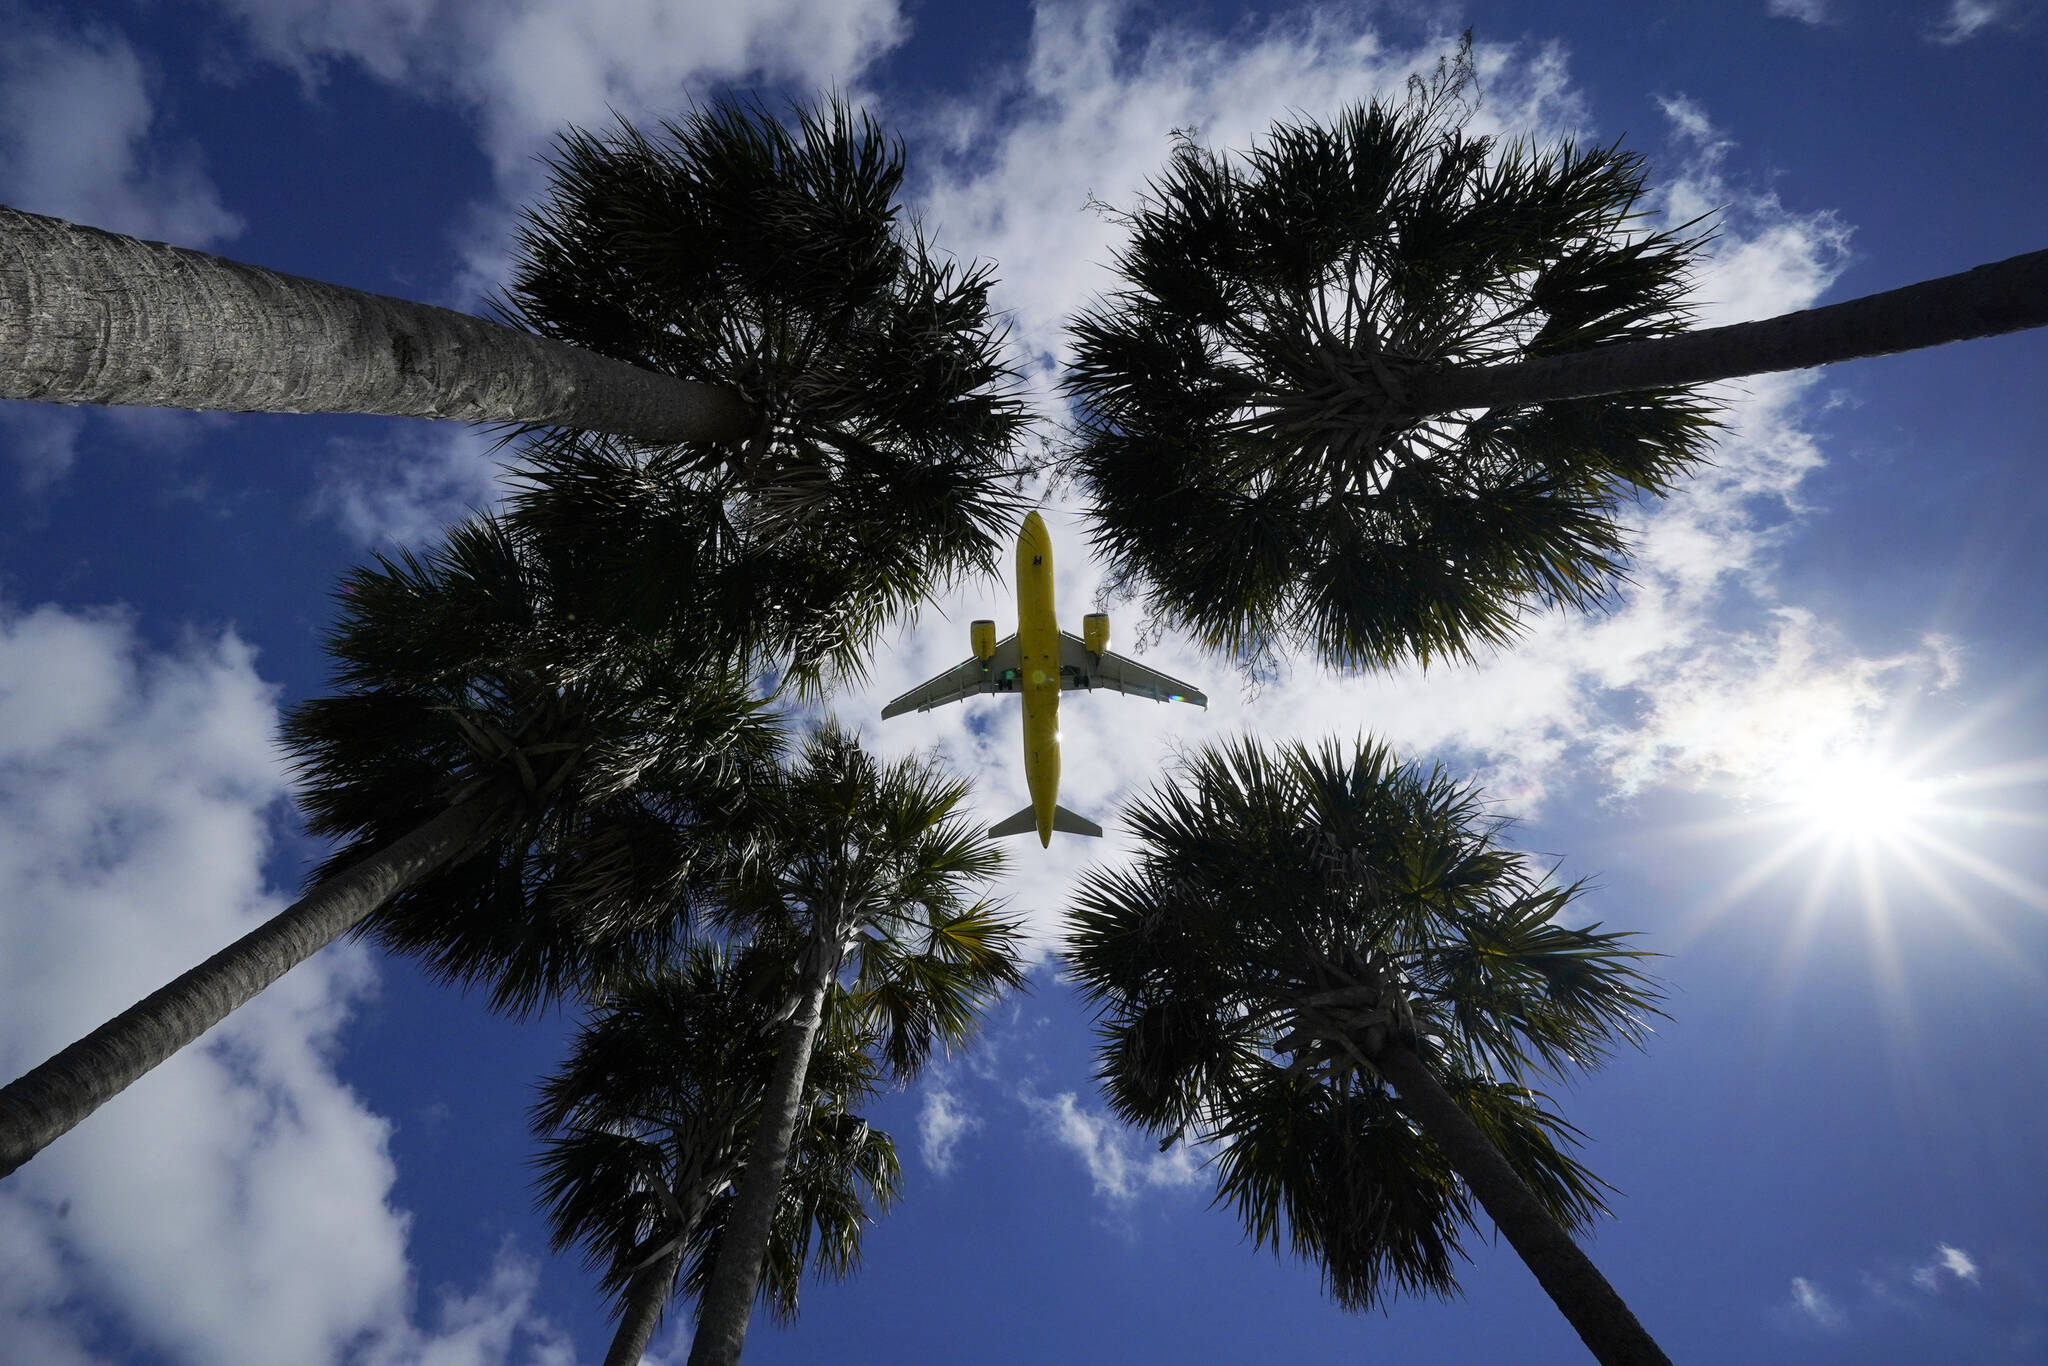 An airliner lands at Tampa International Airport Friday, March 19, 2021 in Tampa, Fla. (AP Photo/Gene J. Puska, File)